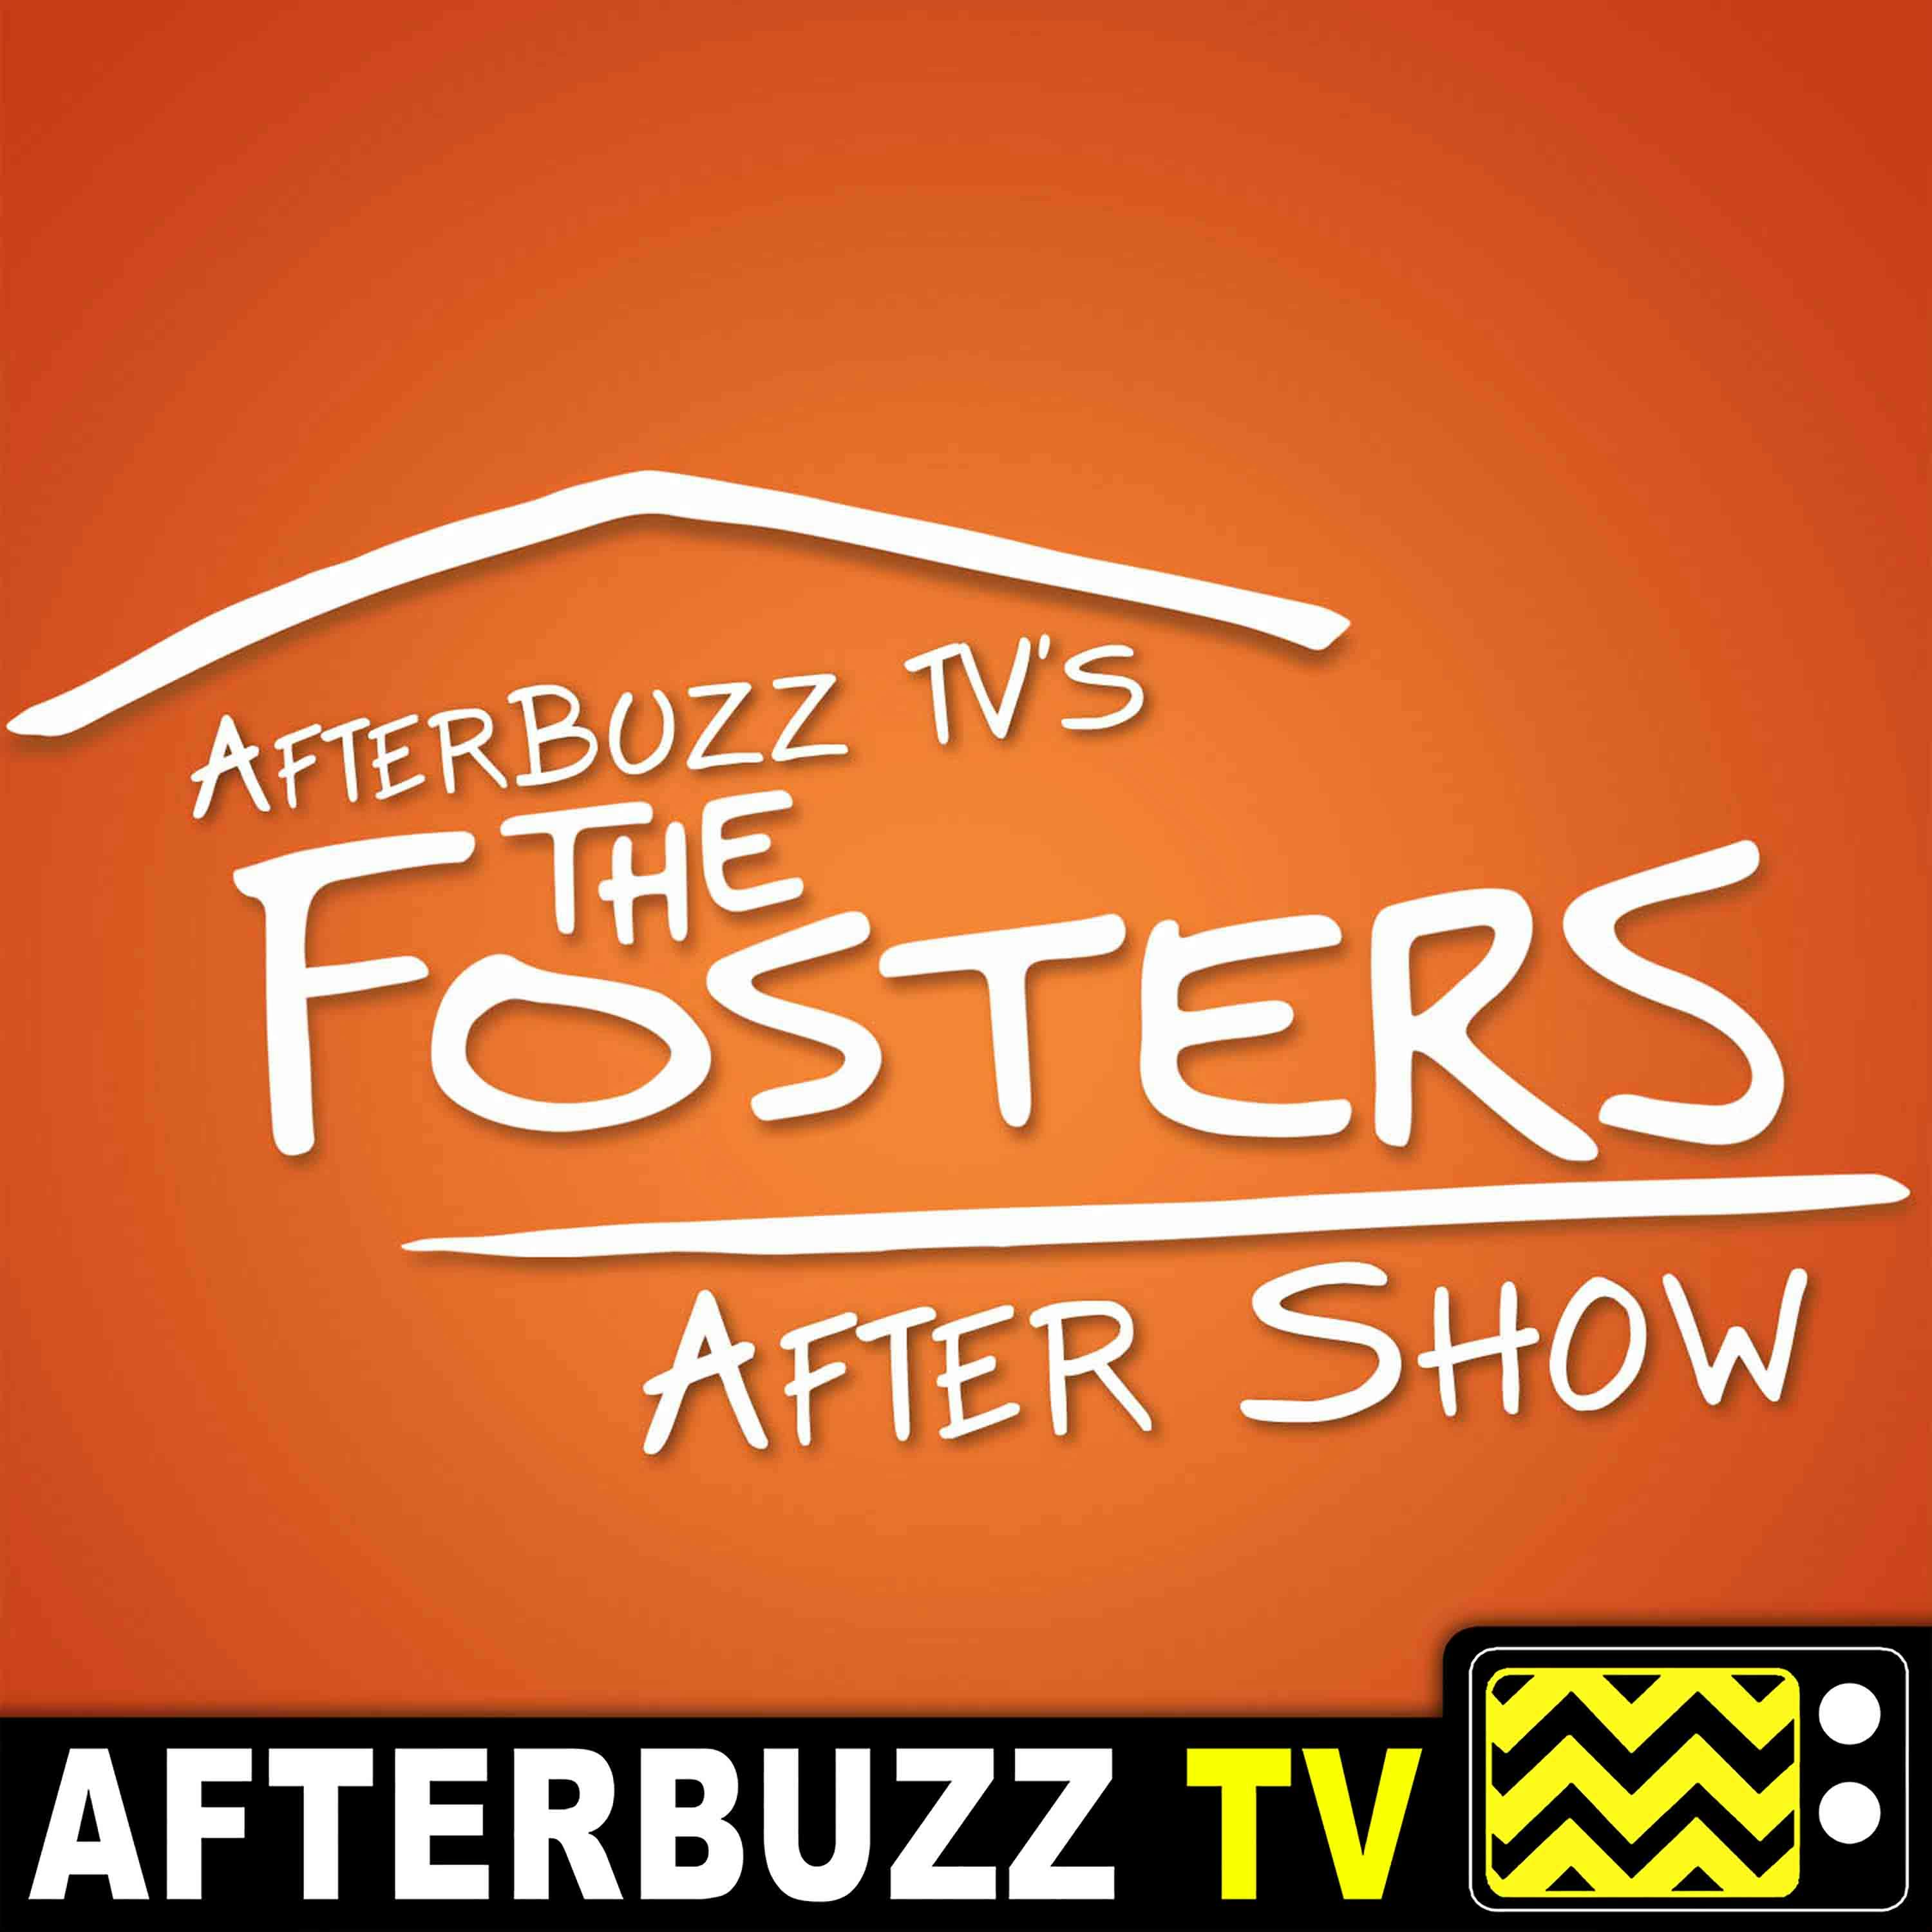 The Fosters S:5 | Contact E:3 | AfterBuzz TV AfterShow